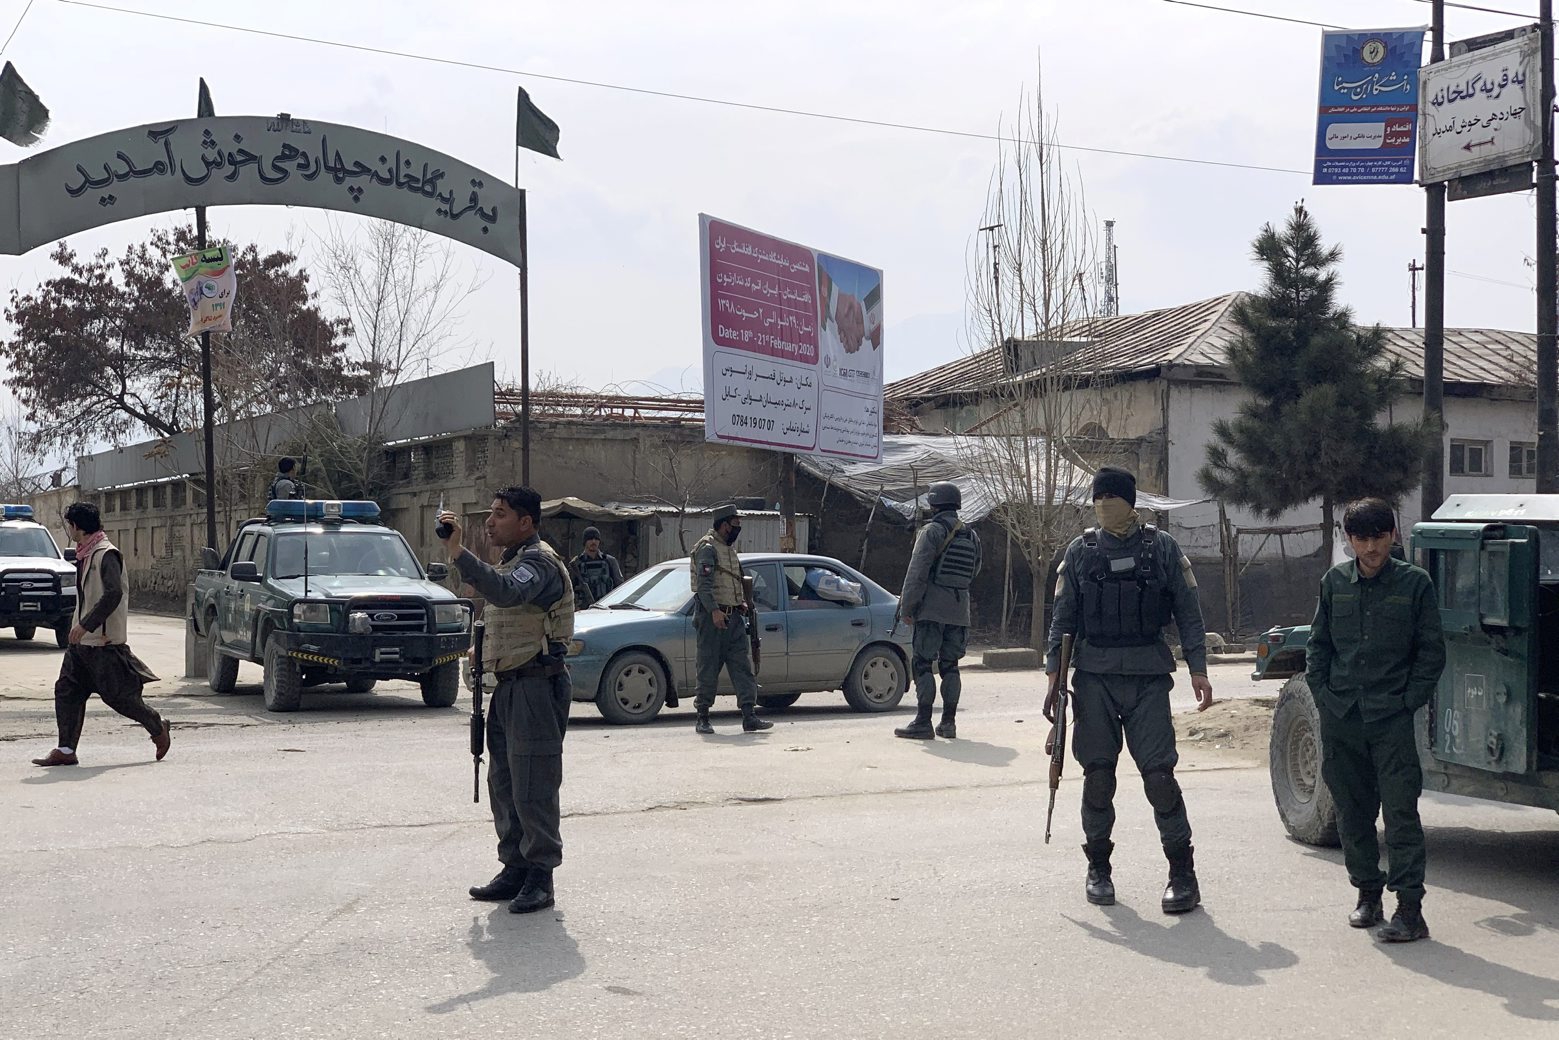 Afghan security personnel arrive at the site of an attack in Kabul, Afghanistan, Friday, March 6, 2020.  Gunmen in Afghanistan's capital of Kabul attacked a remembrance ceremony for a minority Shiite leader on Friday, wounding a dozen of people, officials said. (AP Photo/Rahmat Gul) Afghanistan